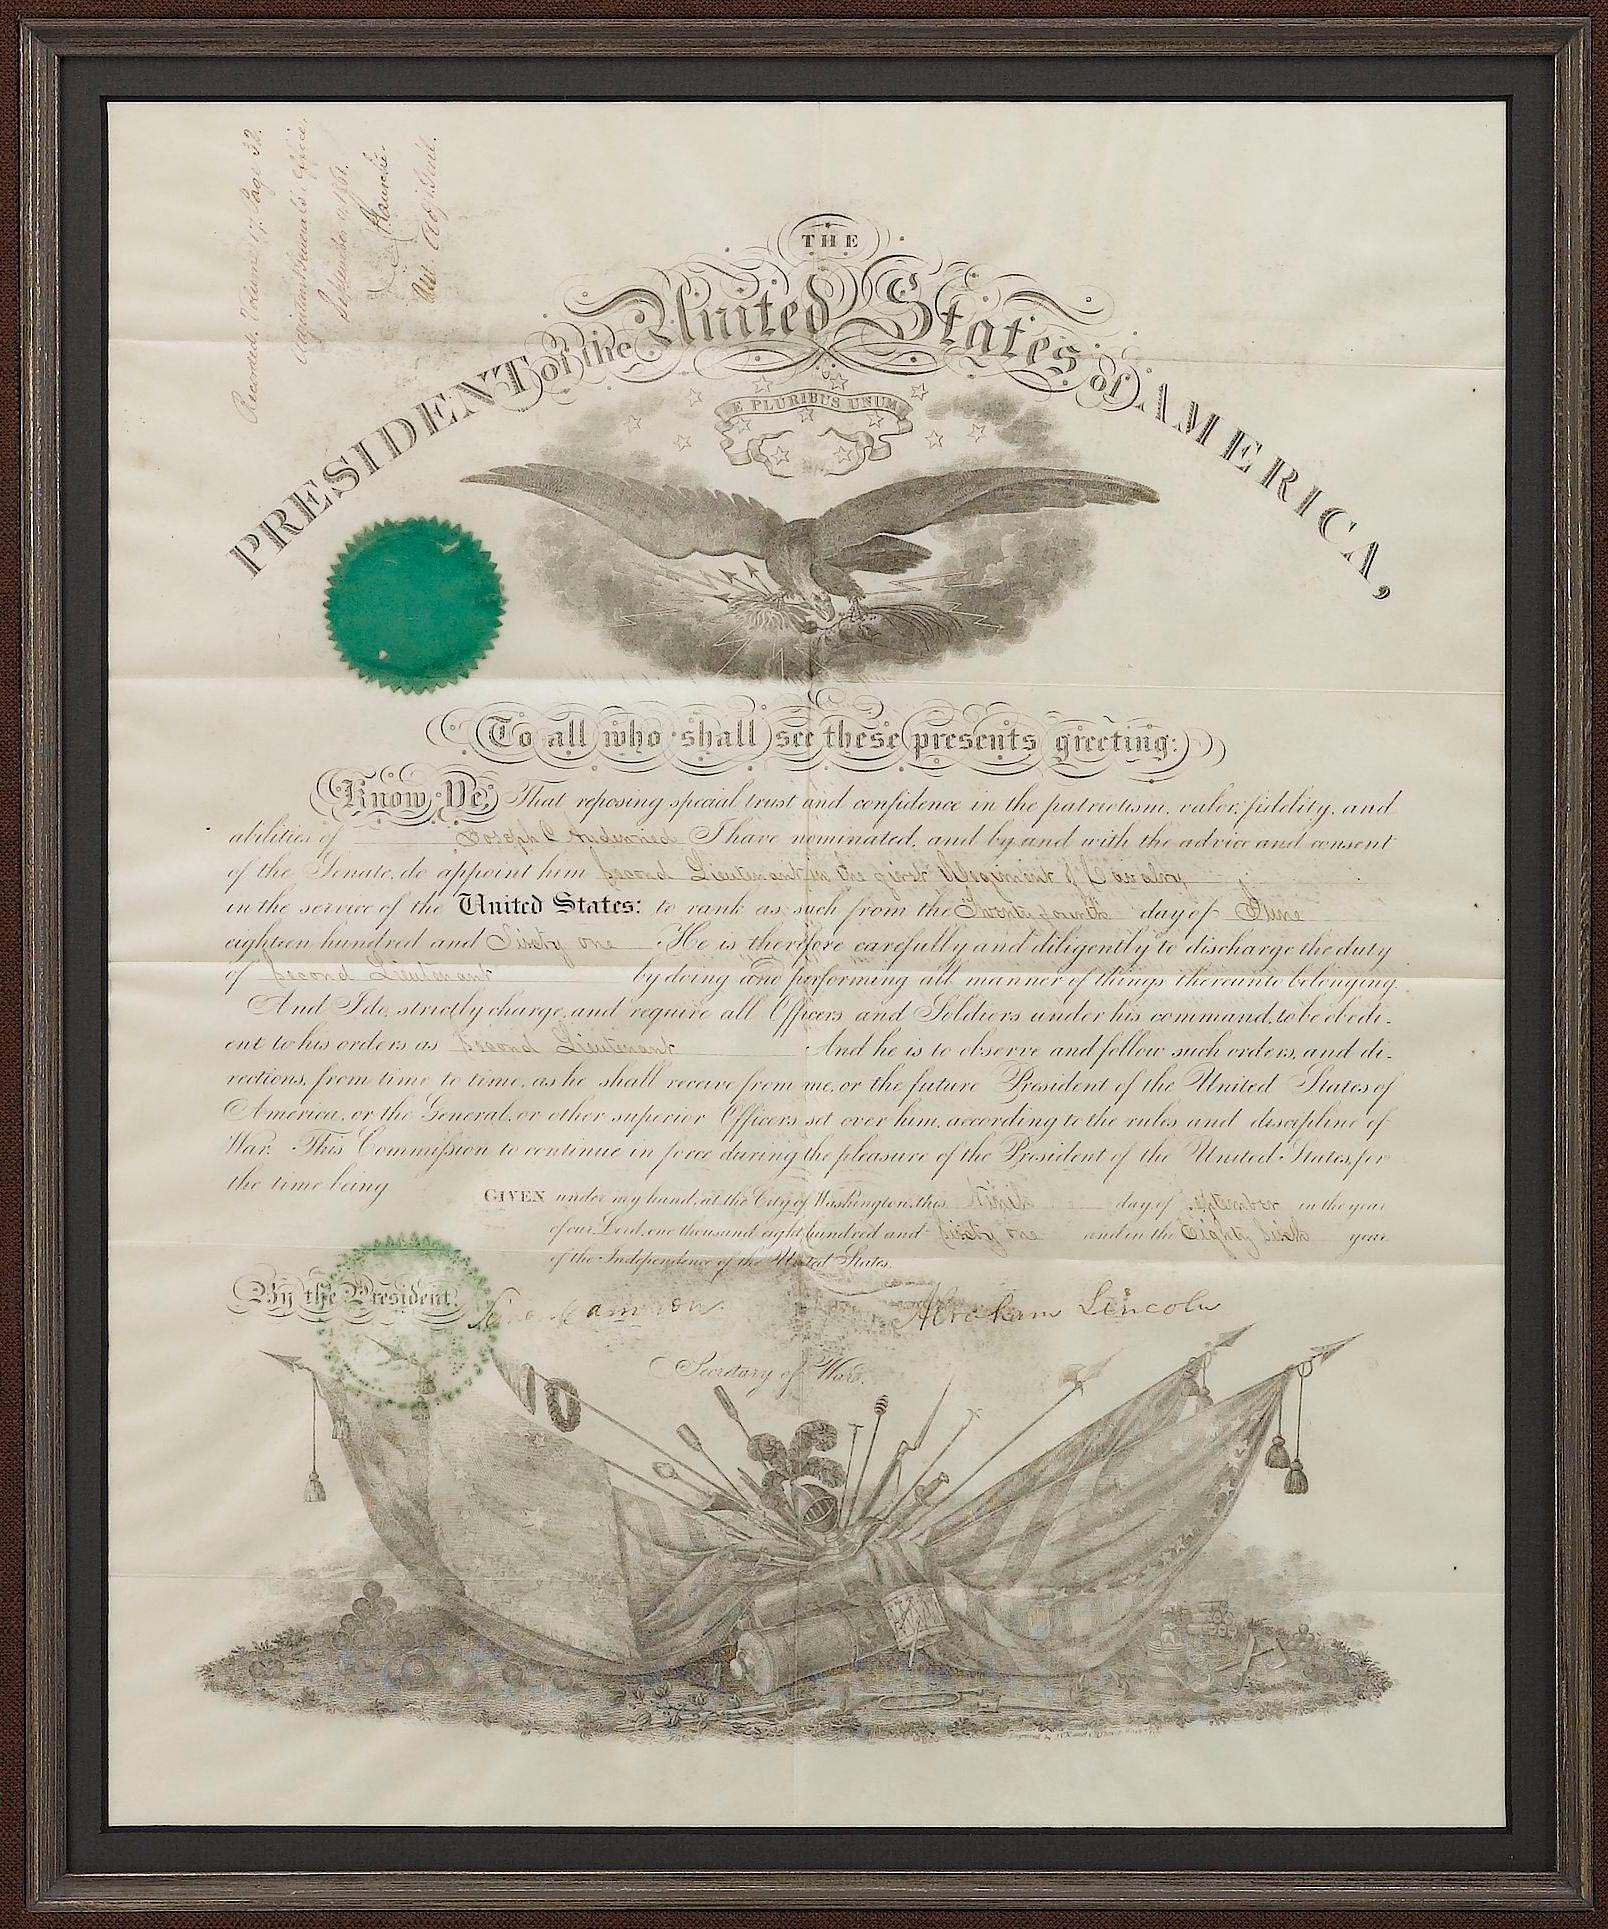 This war-dated Army commission for Second Lieutenant Joseph Audenried is signed by Abraham Lincoln. The signature is accompanied by a reproduction photograph of Lincoln in 1863. The original commission was signed by Lincoln on September 9, 1861 and